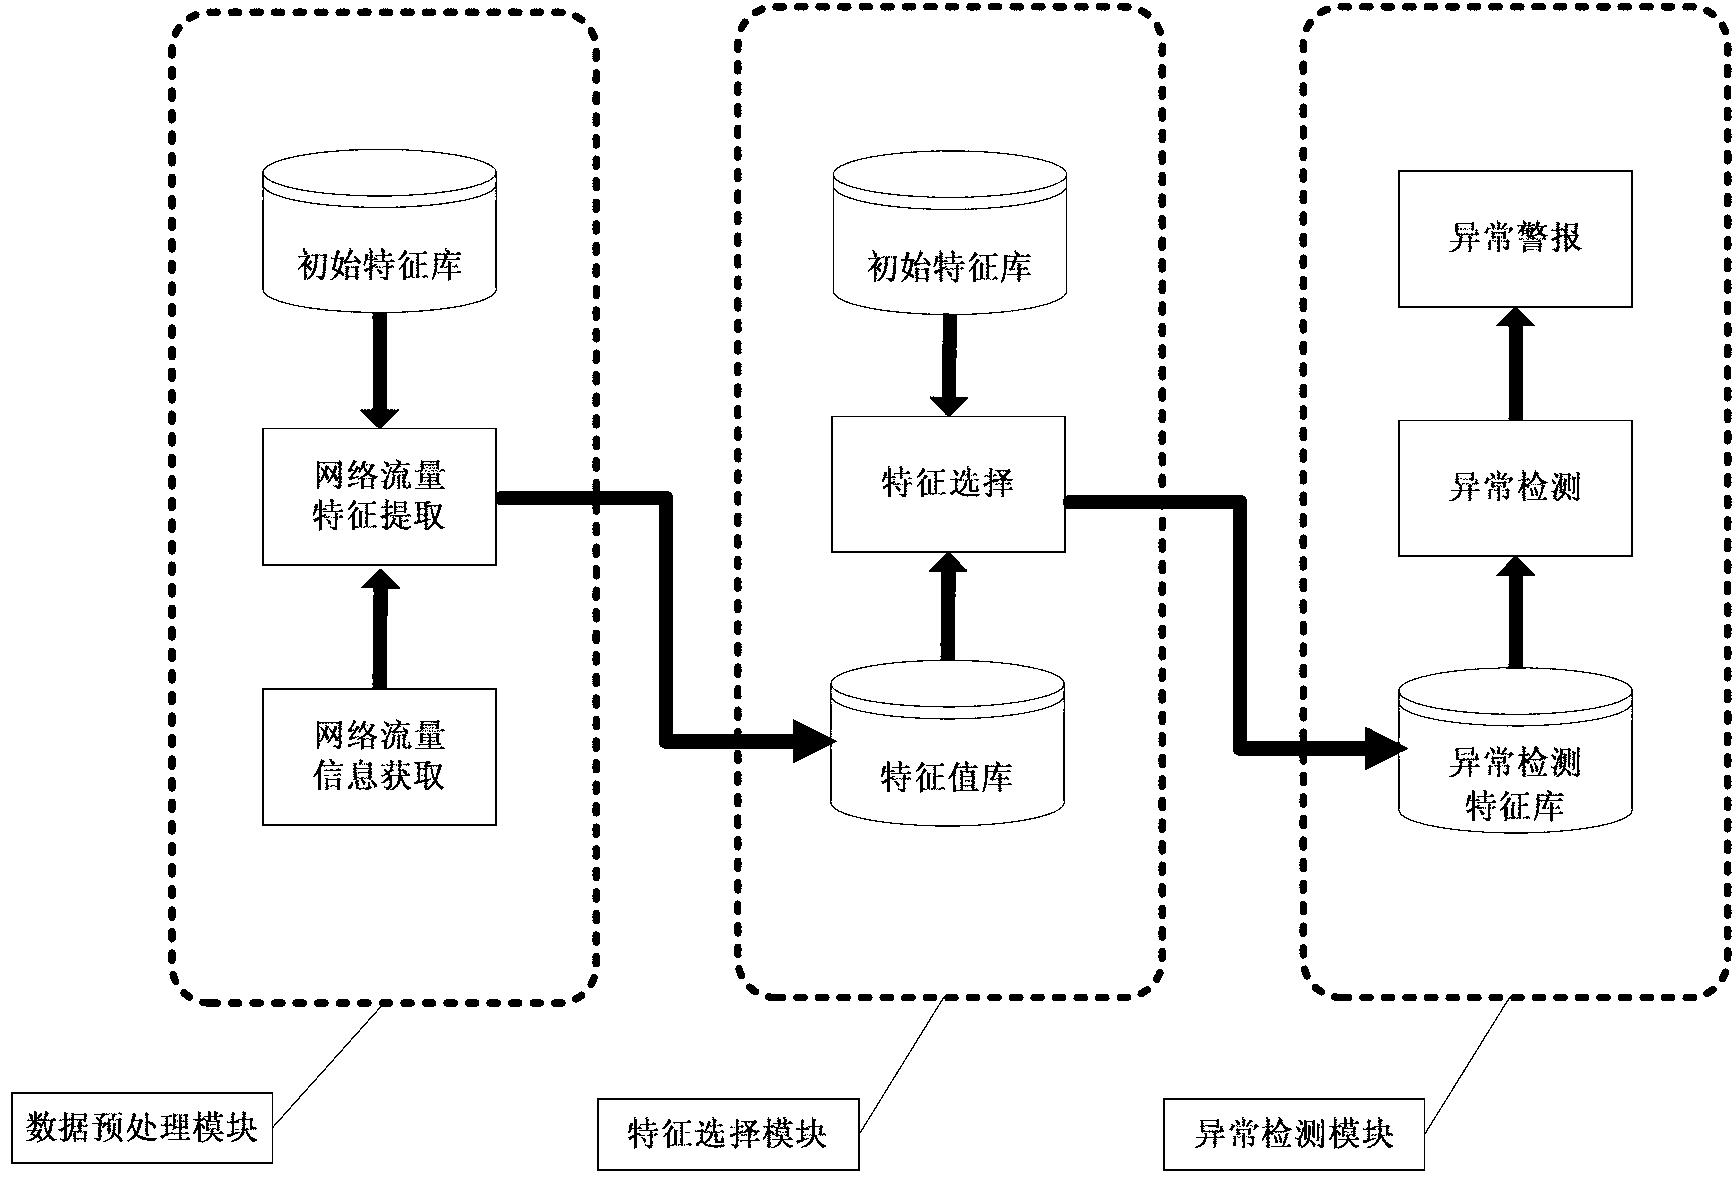 Anomaly detection method based on network flow analysis